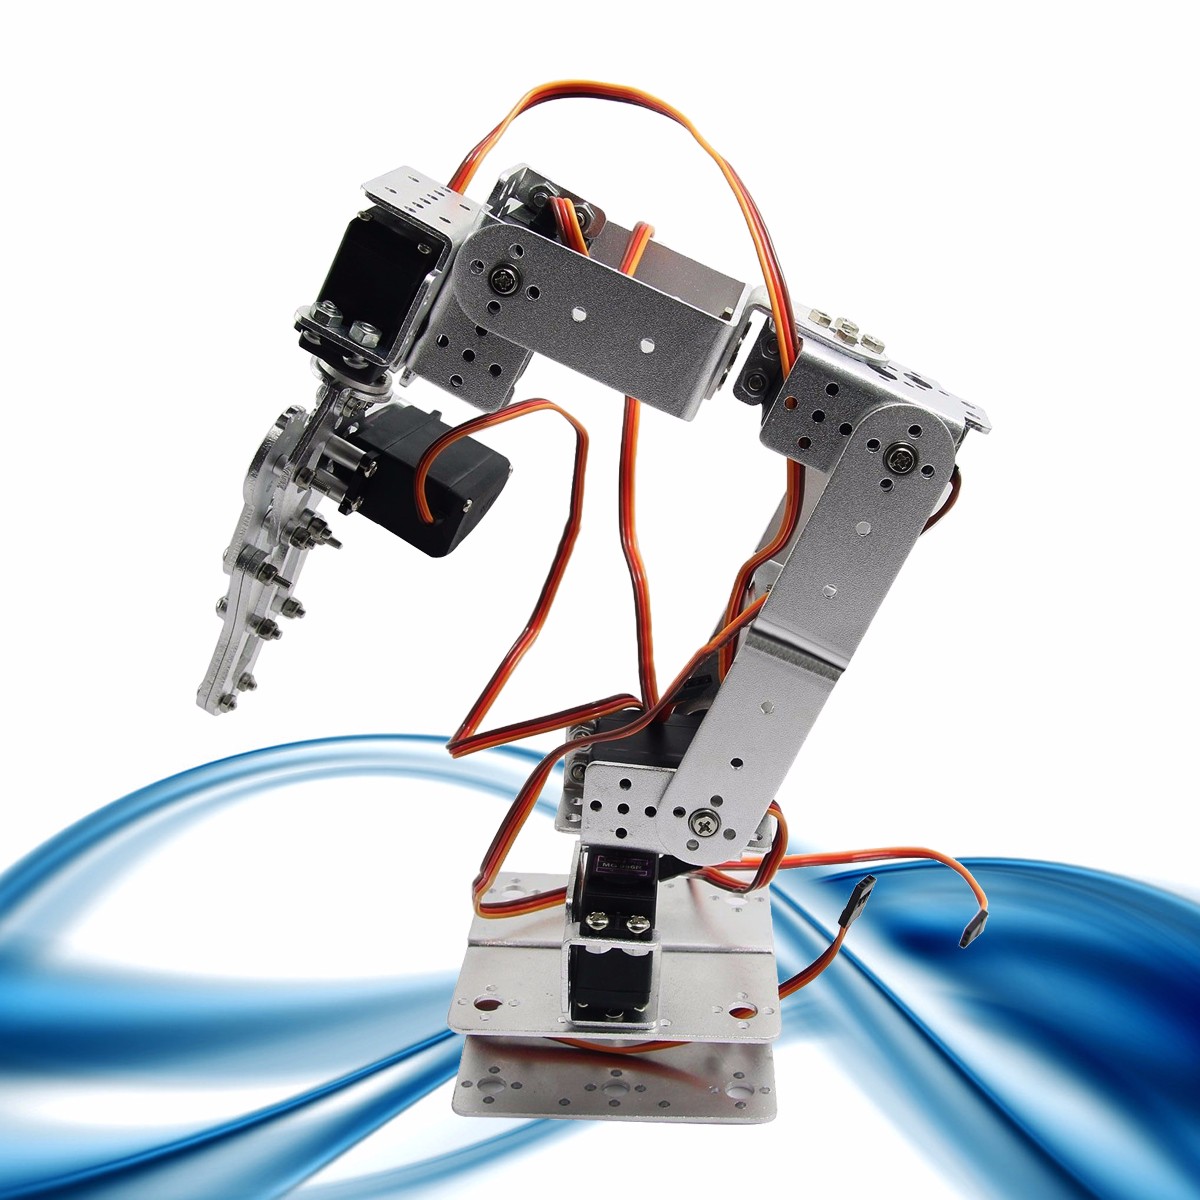 ROT2U 6DOF Aluminium Robot Arm Clamp Claw Mount Kit With Servos For Arduino-Silver 26